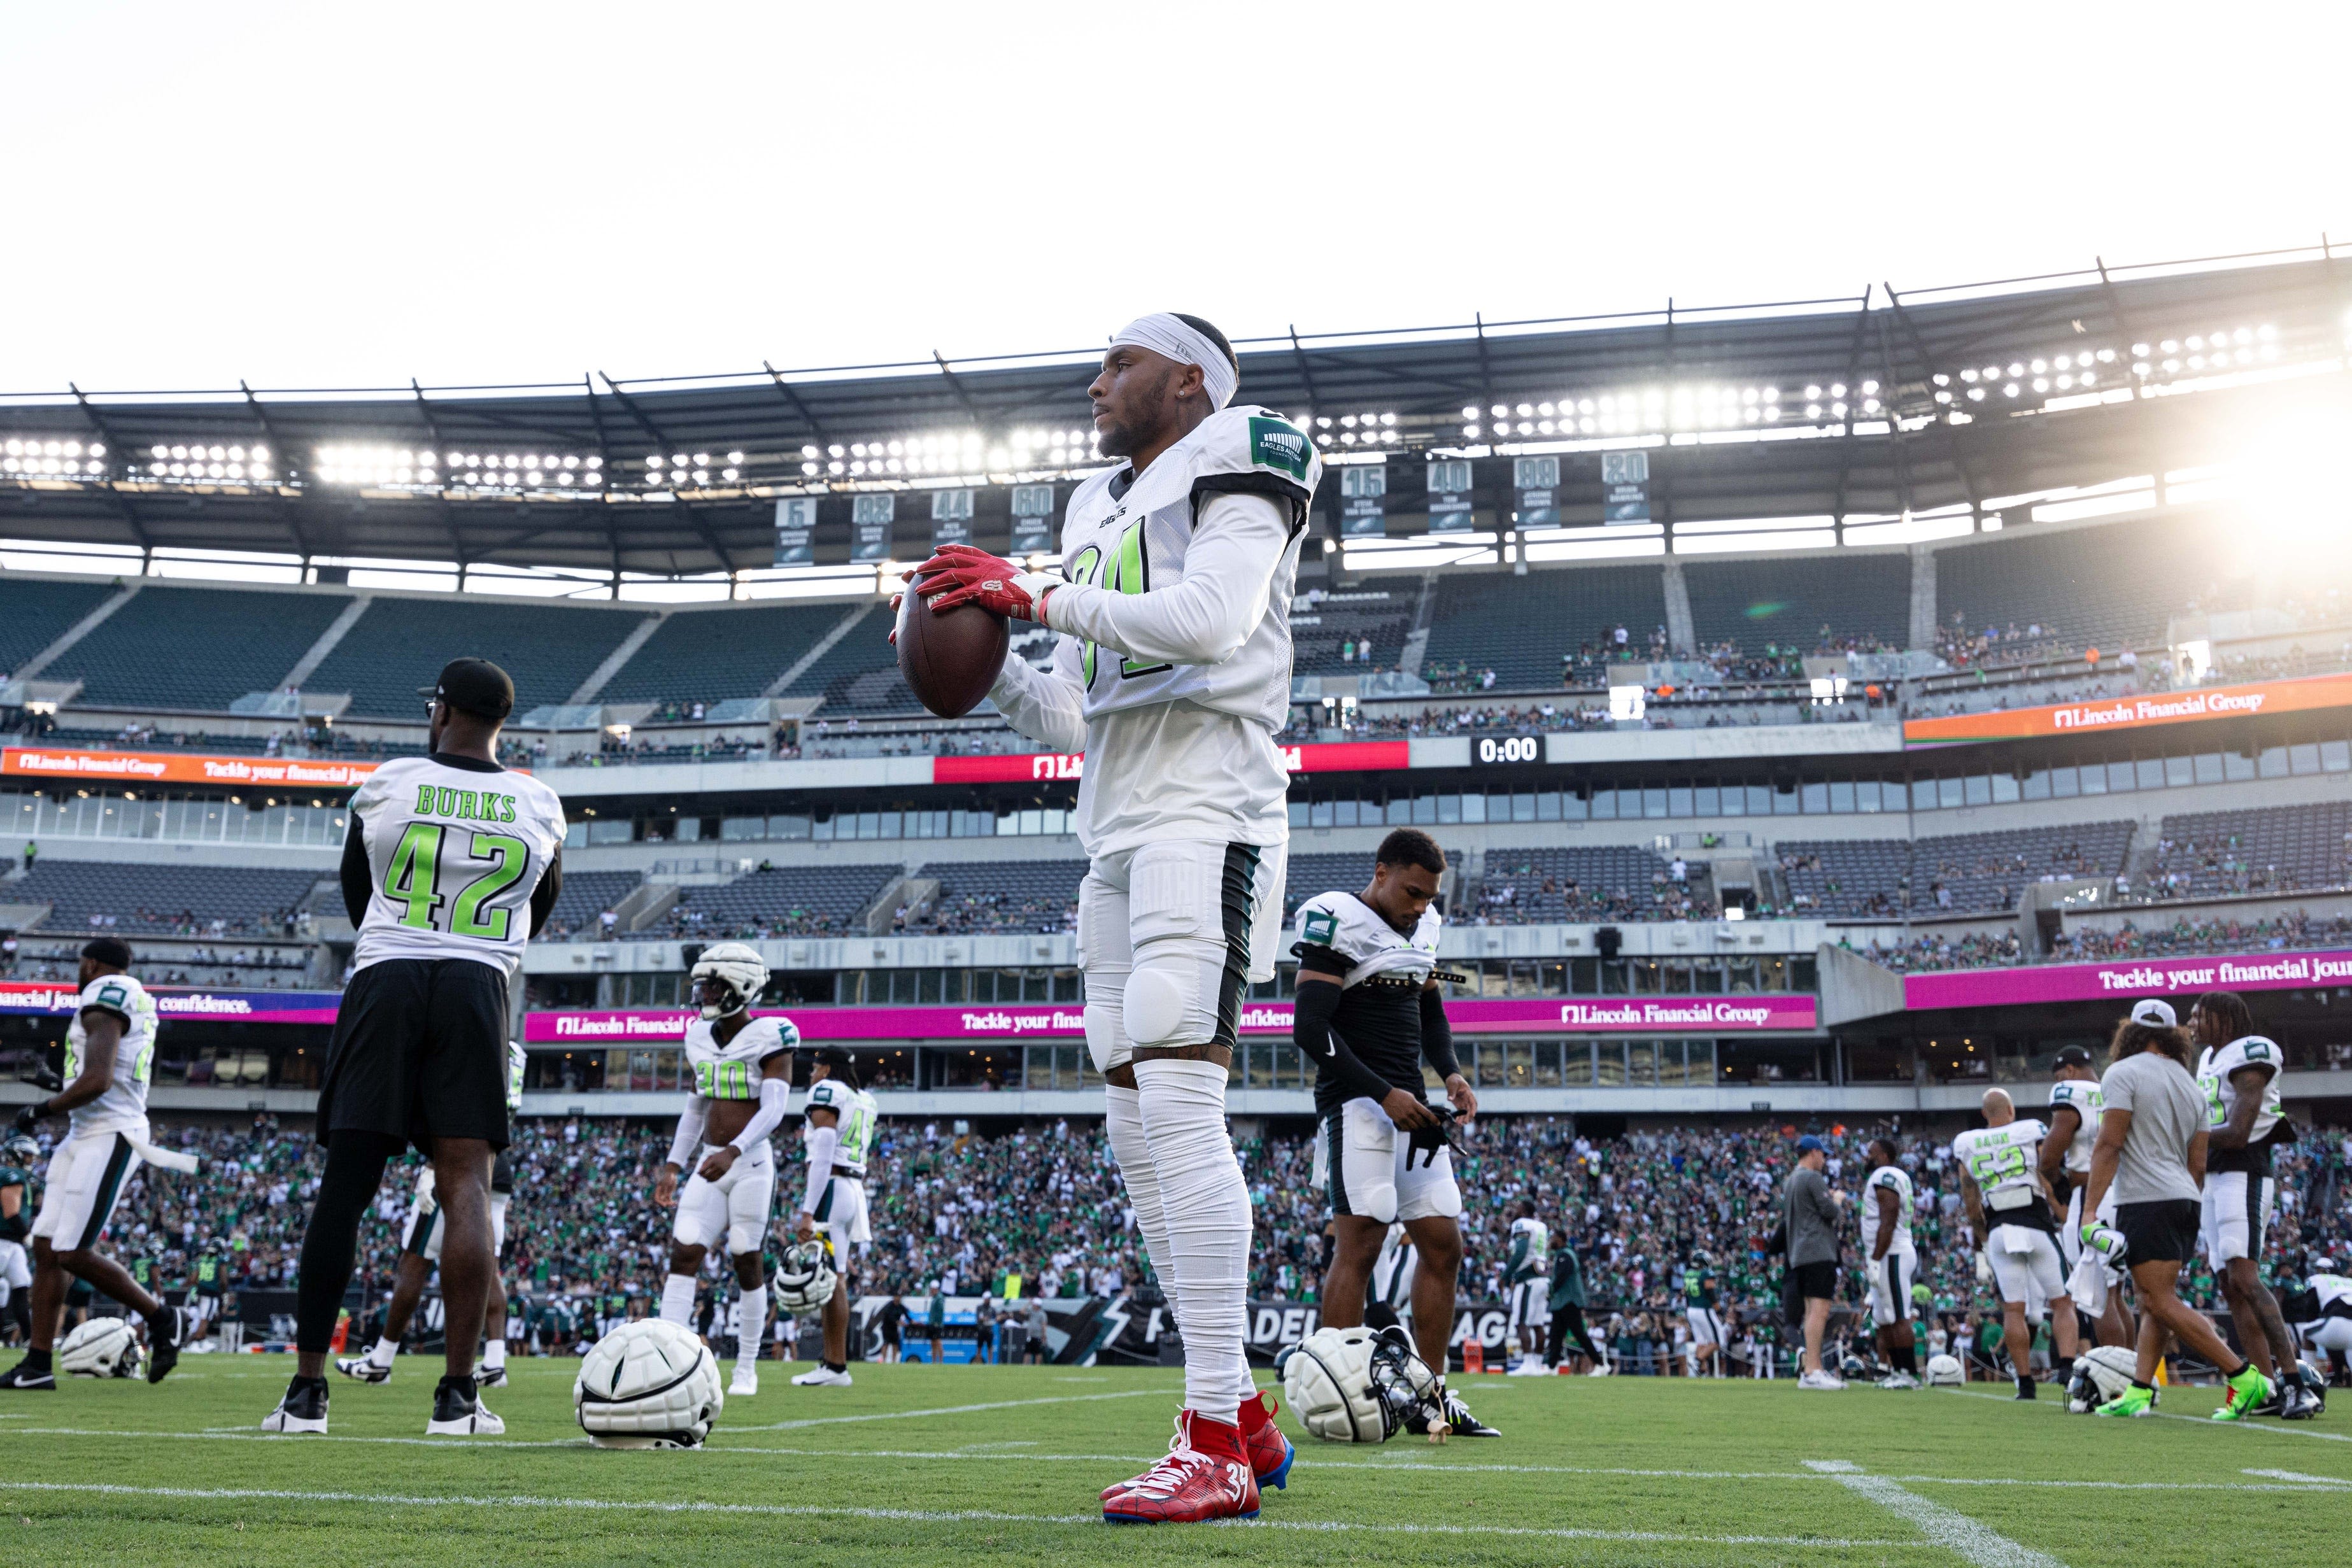 Top photos from the Eagles open training camp practice at Lincoln Financial Field